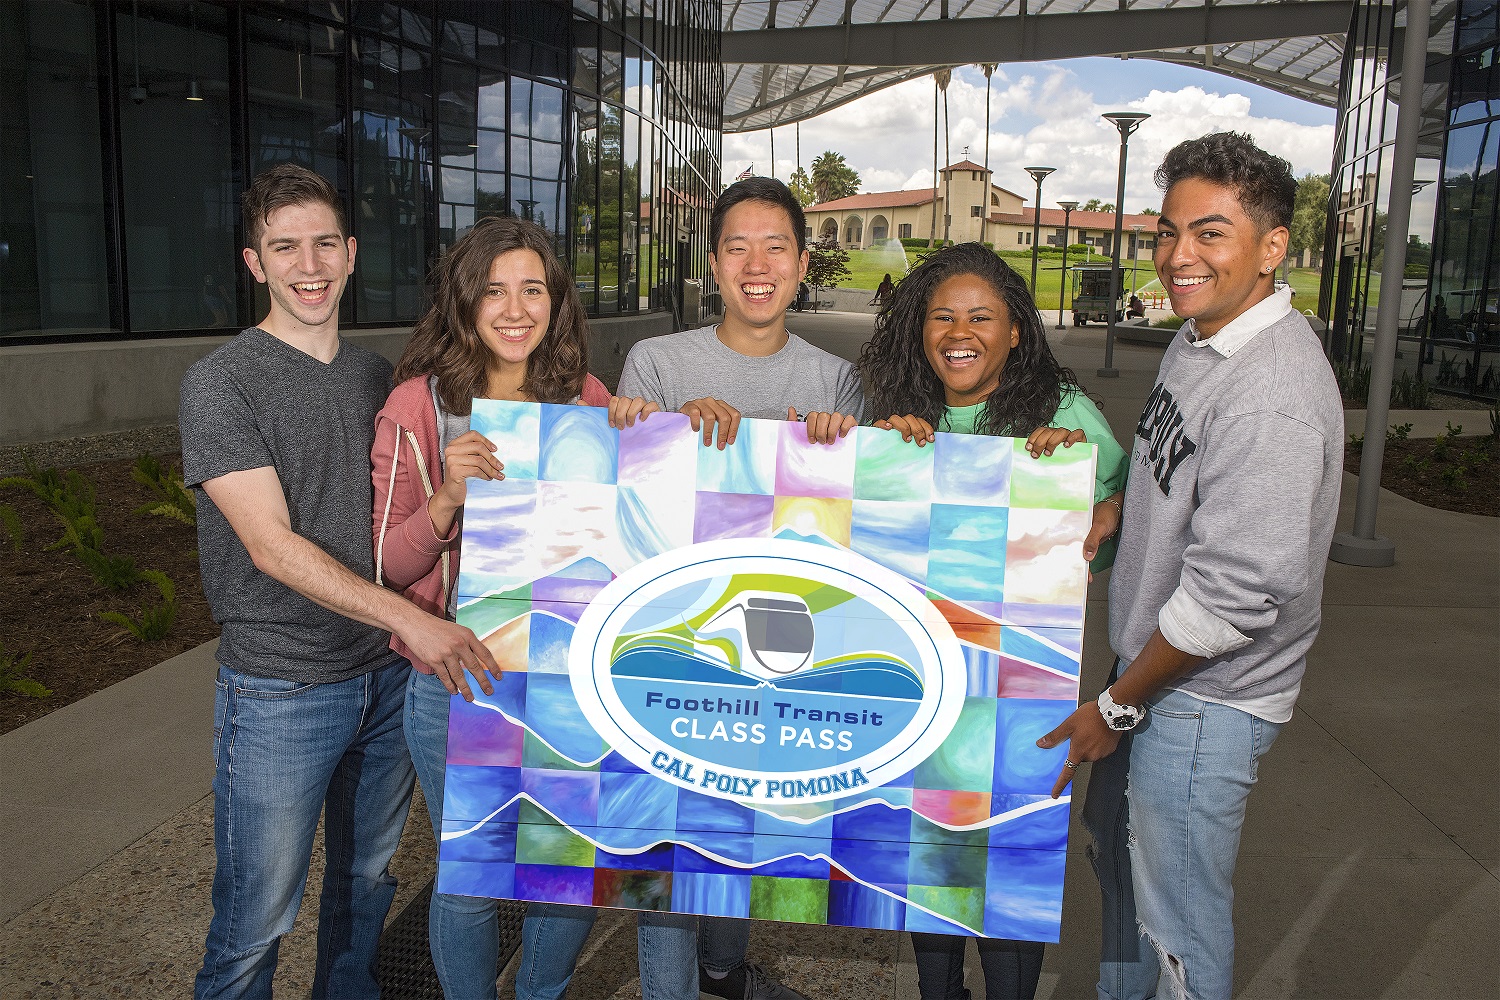 Students hold up a card for Foothill Transit Class Pass